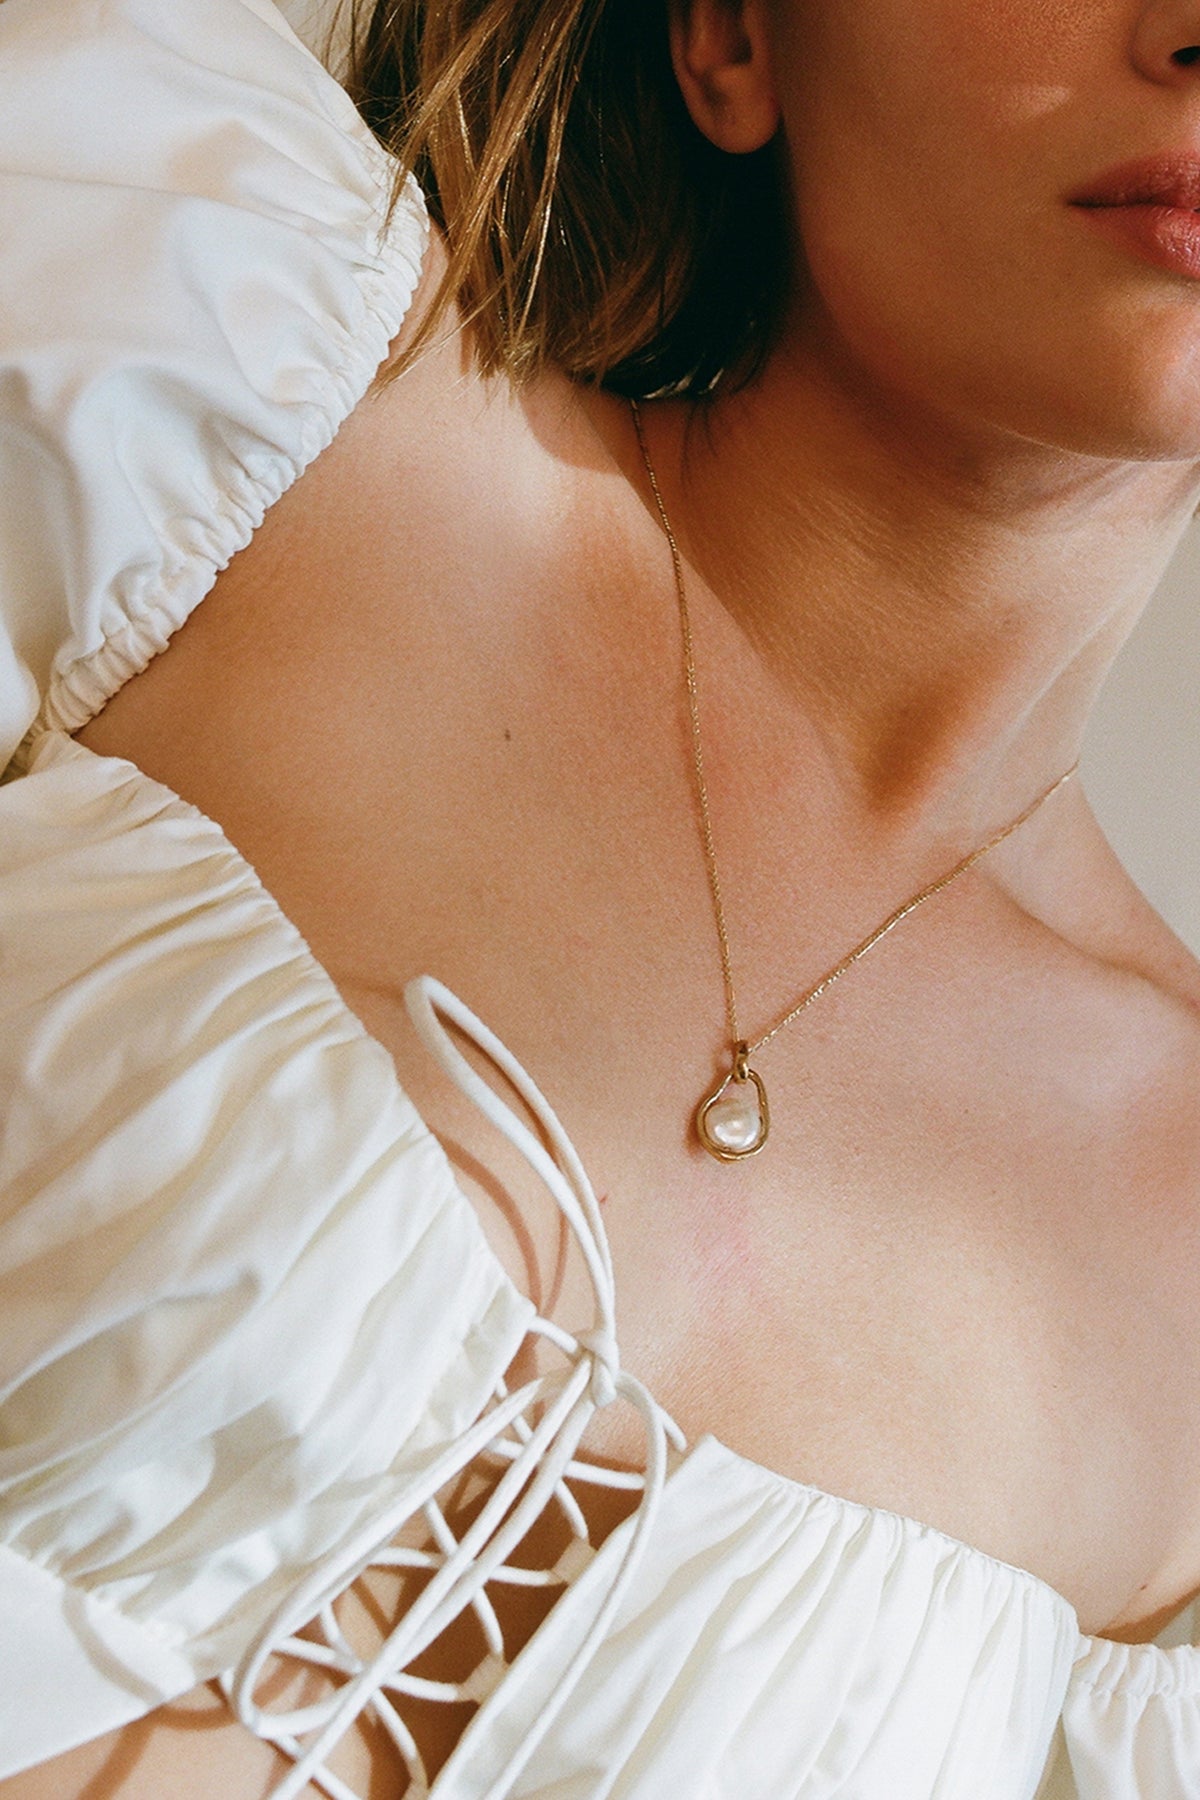 caged pearl necklace